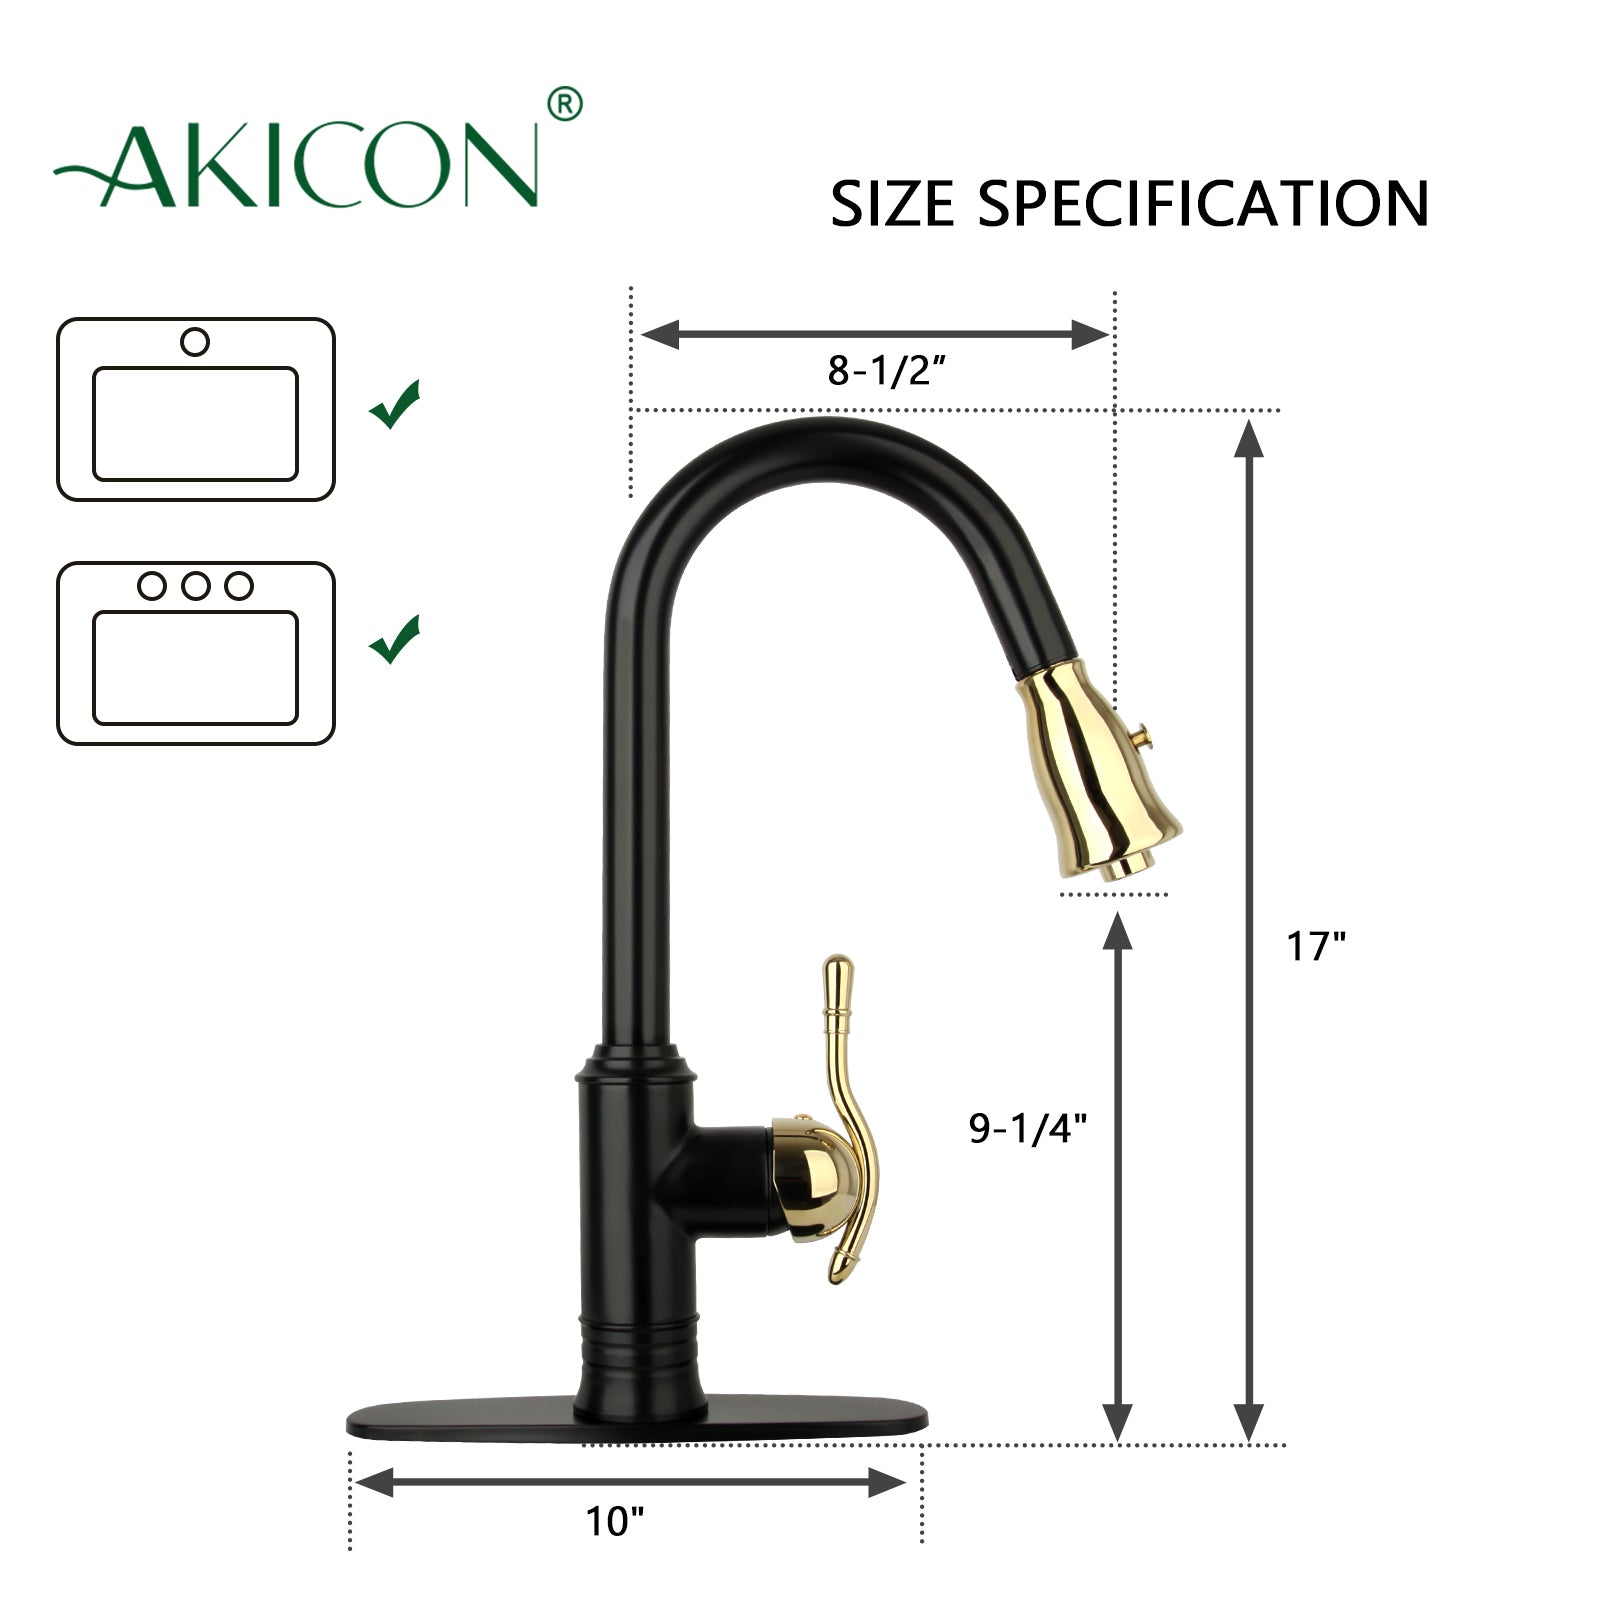 Two-Tone Matte Black & Gold Pull Out Kitchen Faucet with Deck Plate, Single Level Solid Brass Kitchen Sink Faucets with Pull Down Sprayer - AK415BLZG